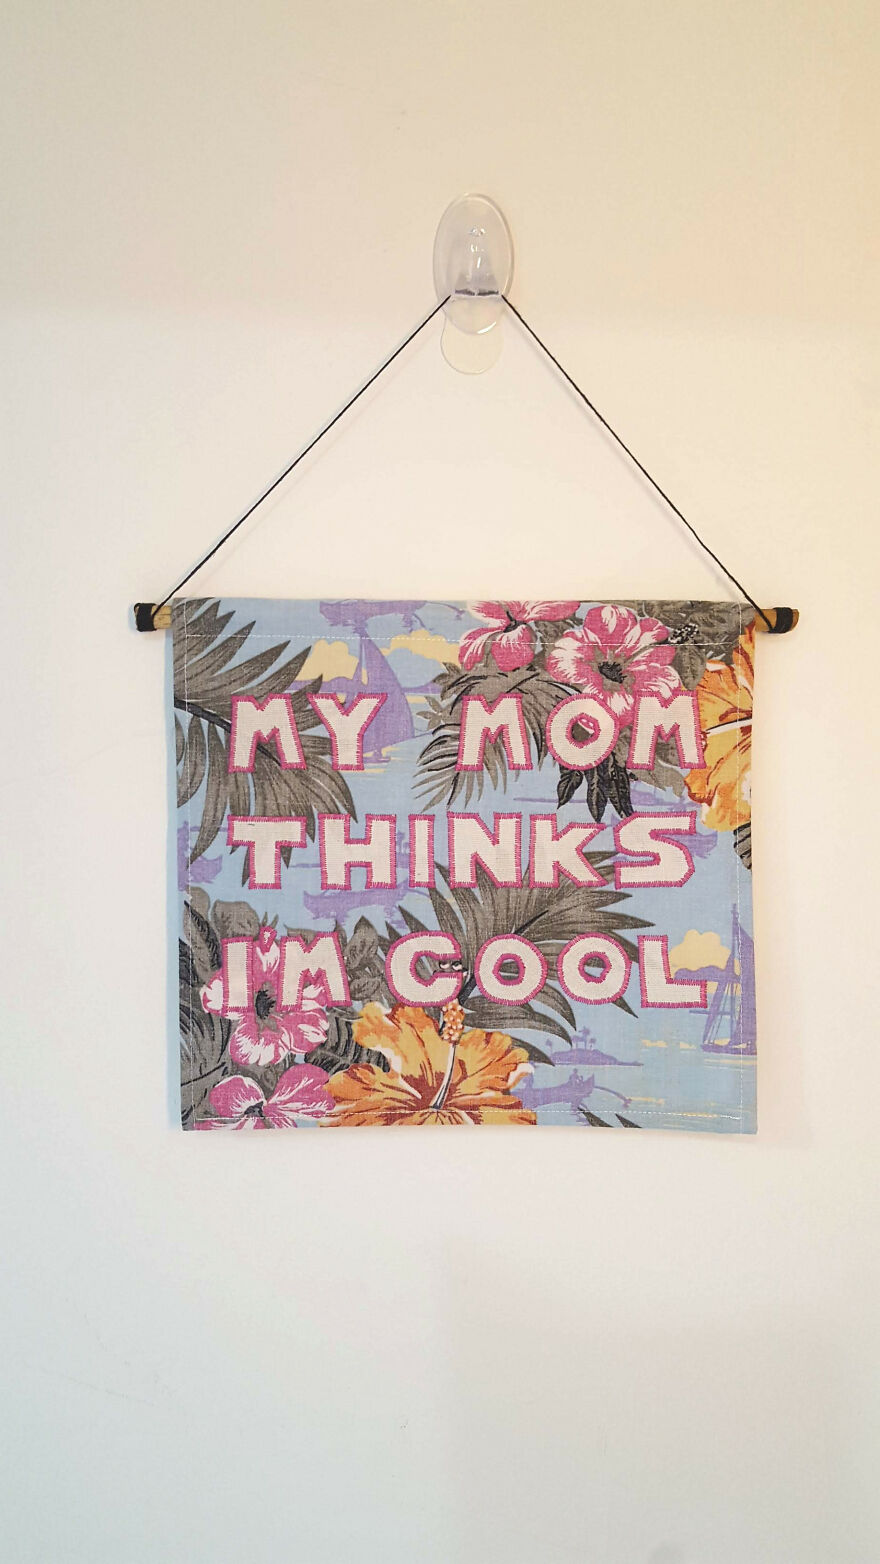 I Make Applique Wall Hangings With Strange Sayings On Vintage Fabric Backgrounds